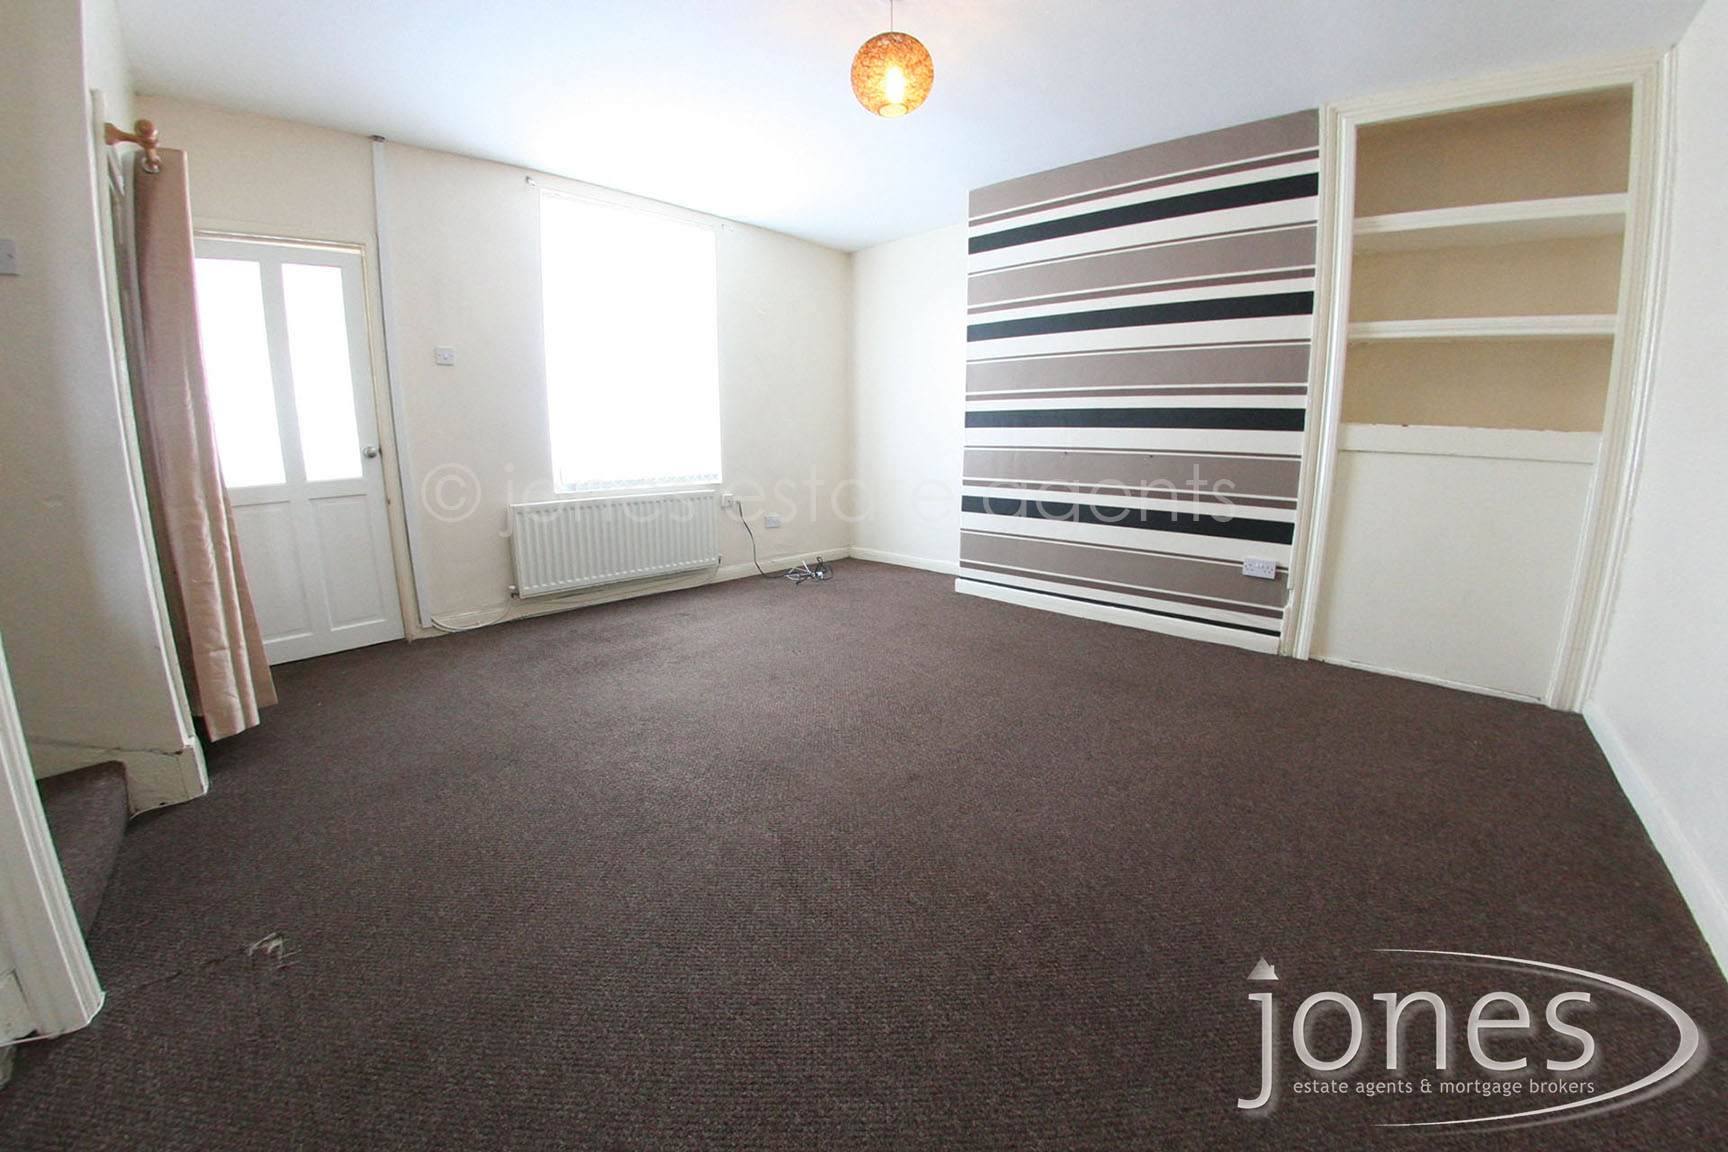 Home for Sale Let - Photo 03 North Road West,Wingate,TS28 5AP